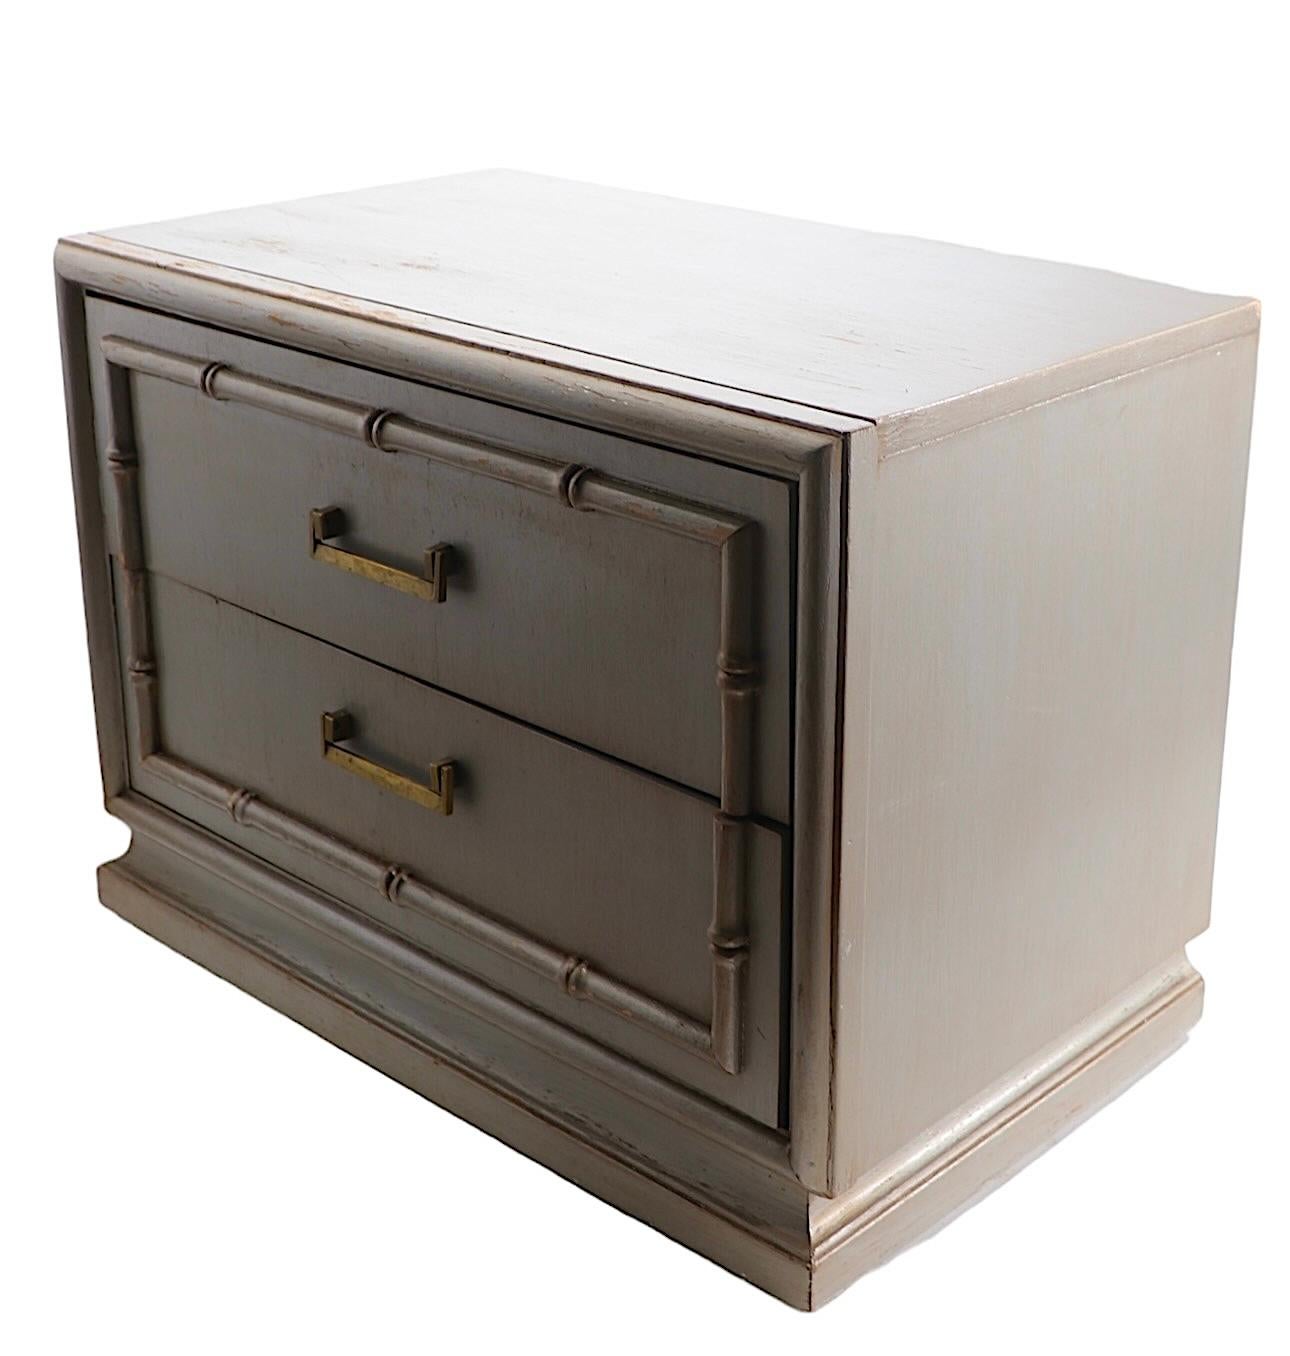 Pair of stylish nightstands, or side, or end tables. Executed  in silver gilt finish with decorative  faux bamboo trim, and brass handles.
The night tables are structurally sound and sturdy, both show cosmetic wear, minor flaws and blemishes, normal